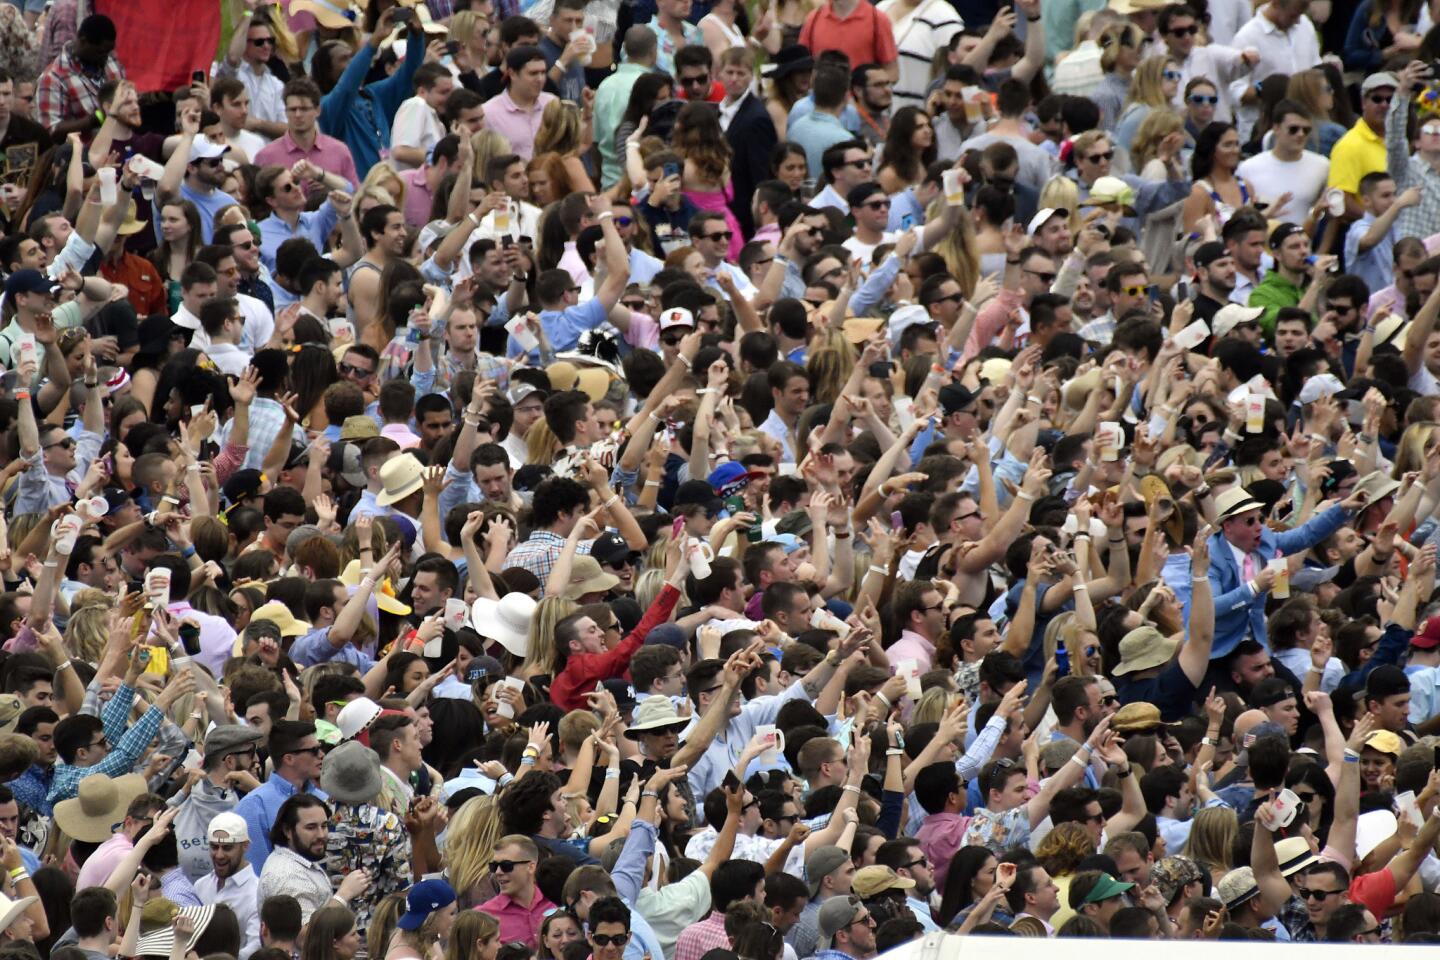 The infield crowd dances to the music of ZEDD before the running of he 142nd Preakness.